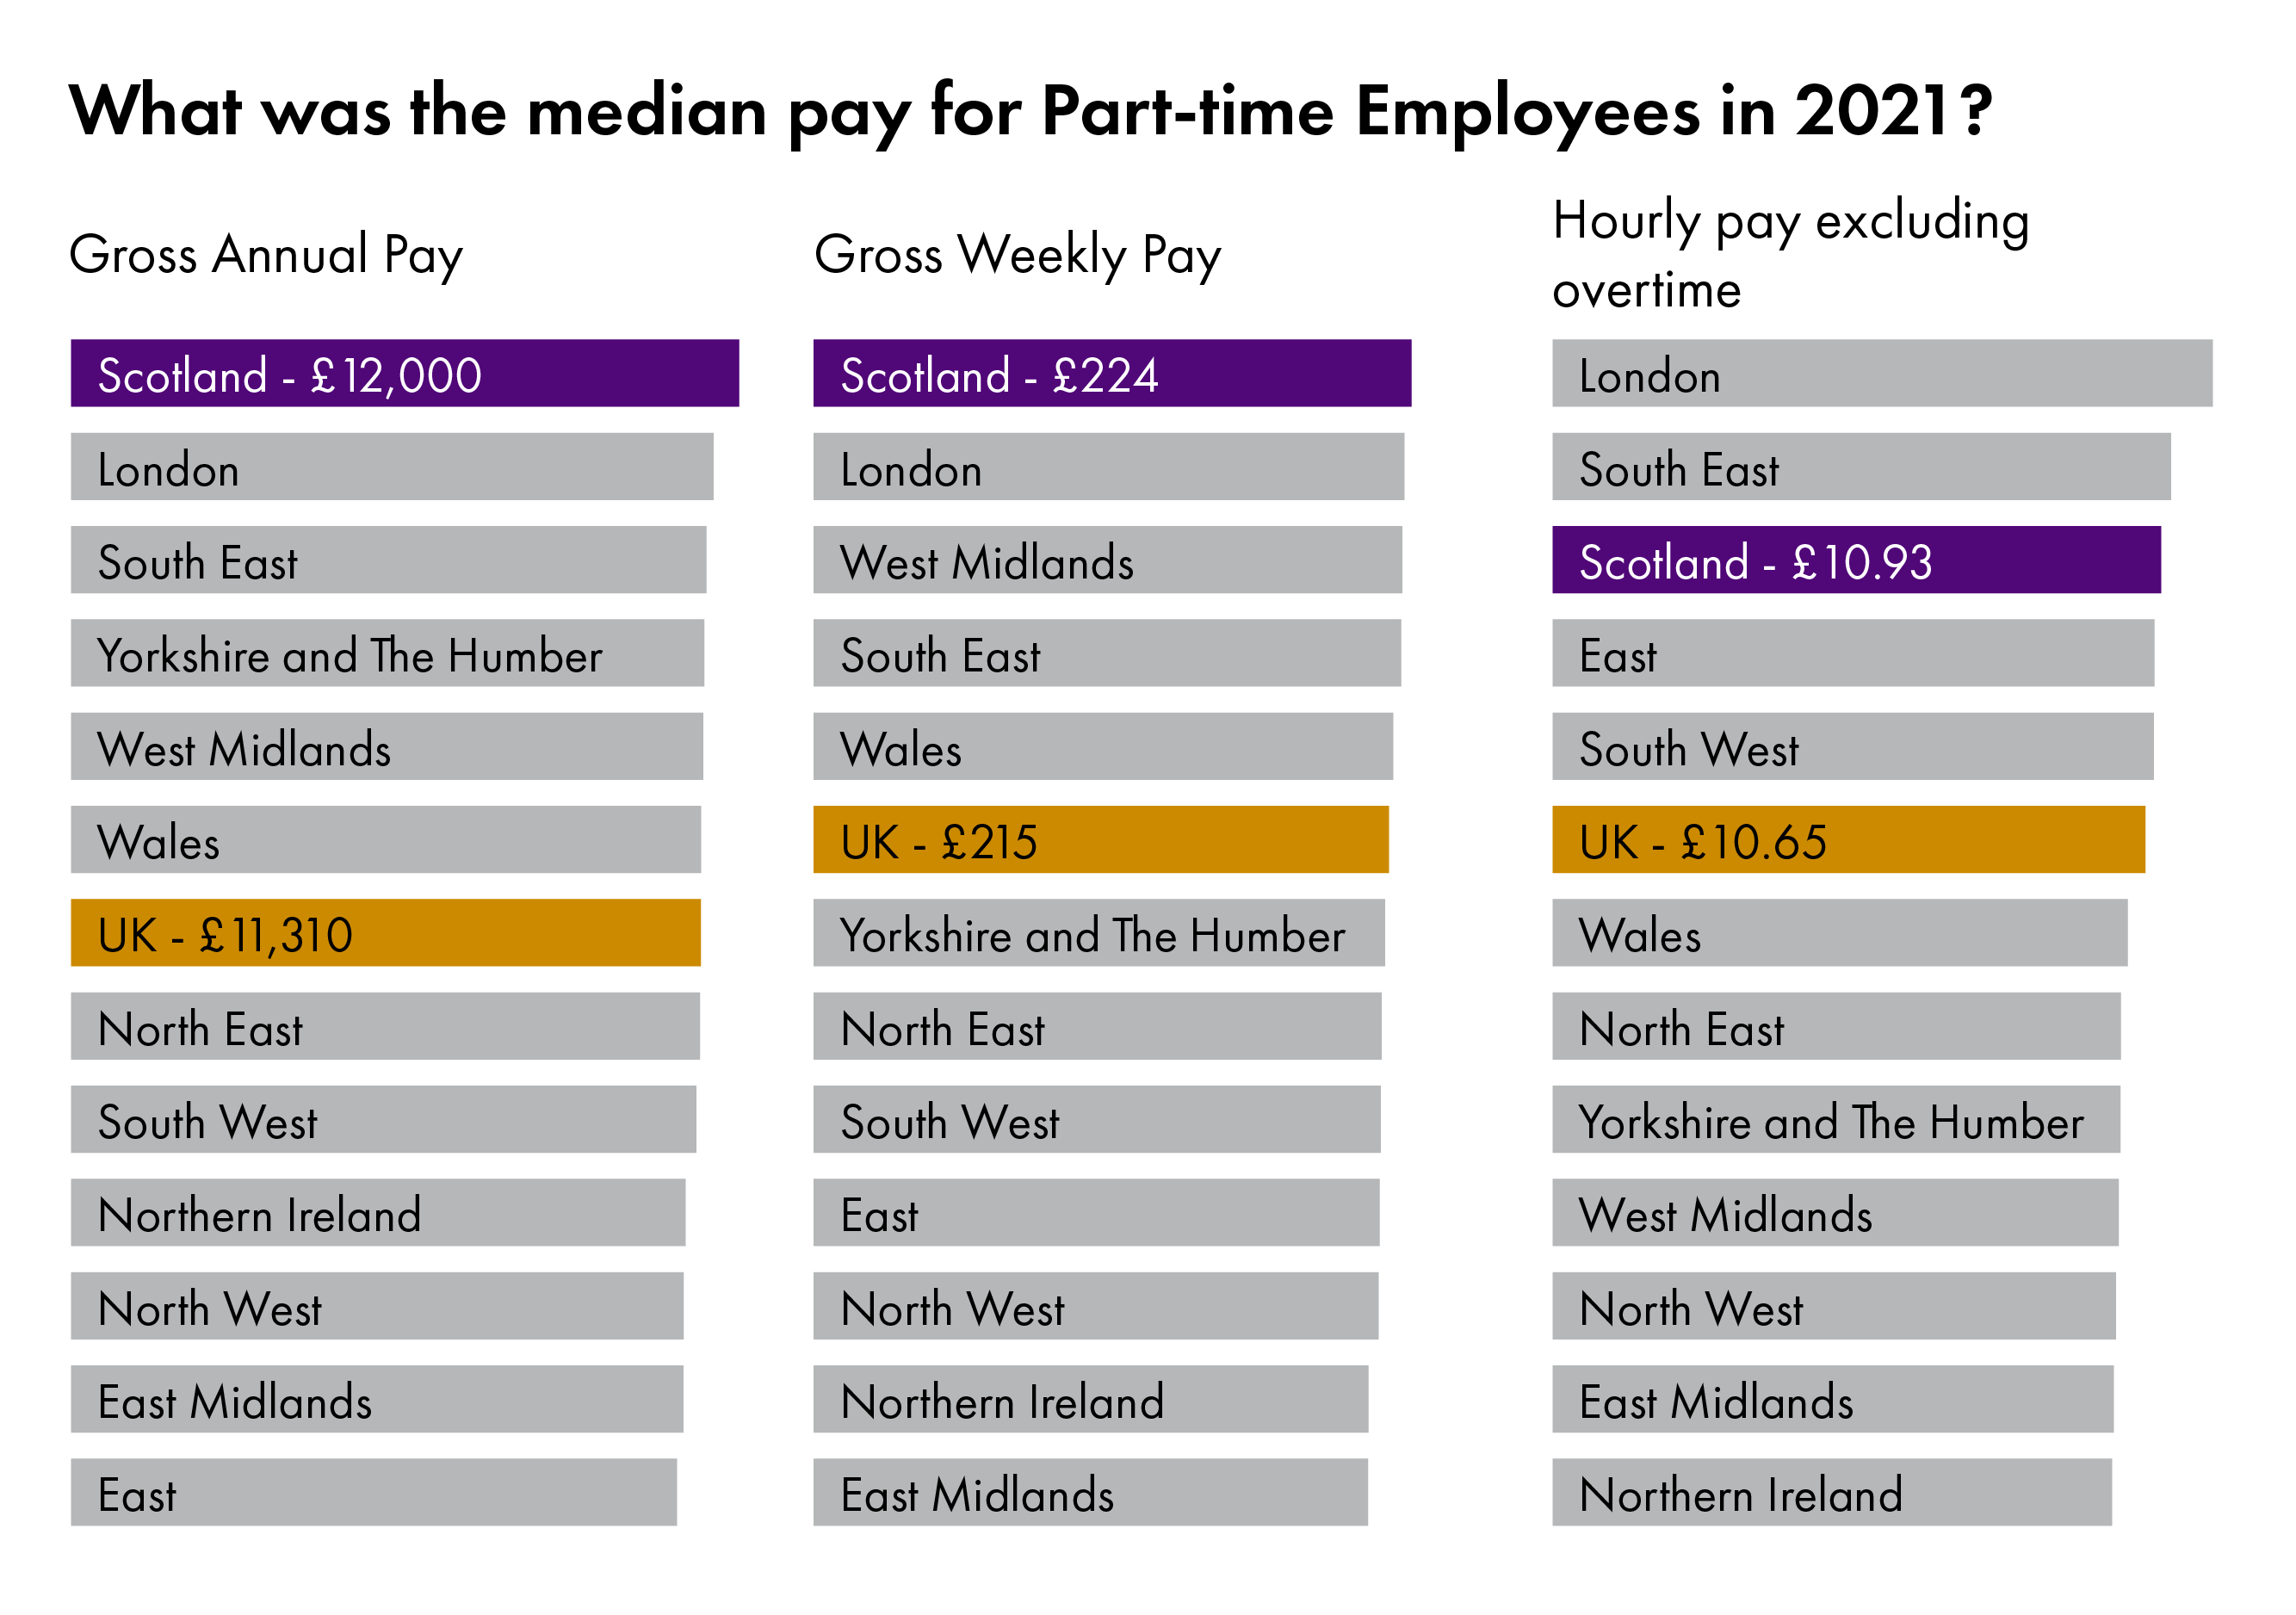 Three horizontal bar charts showing the value of pay for part-time employees by nation and region of the UK. One for gross annual pay, one for gross weekly pay and one for hourly pay excluding overtime. More detail can be found in the text below.